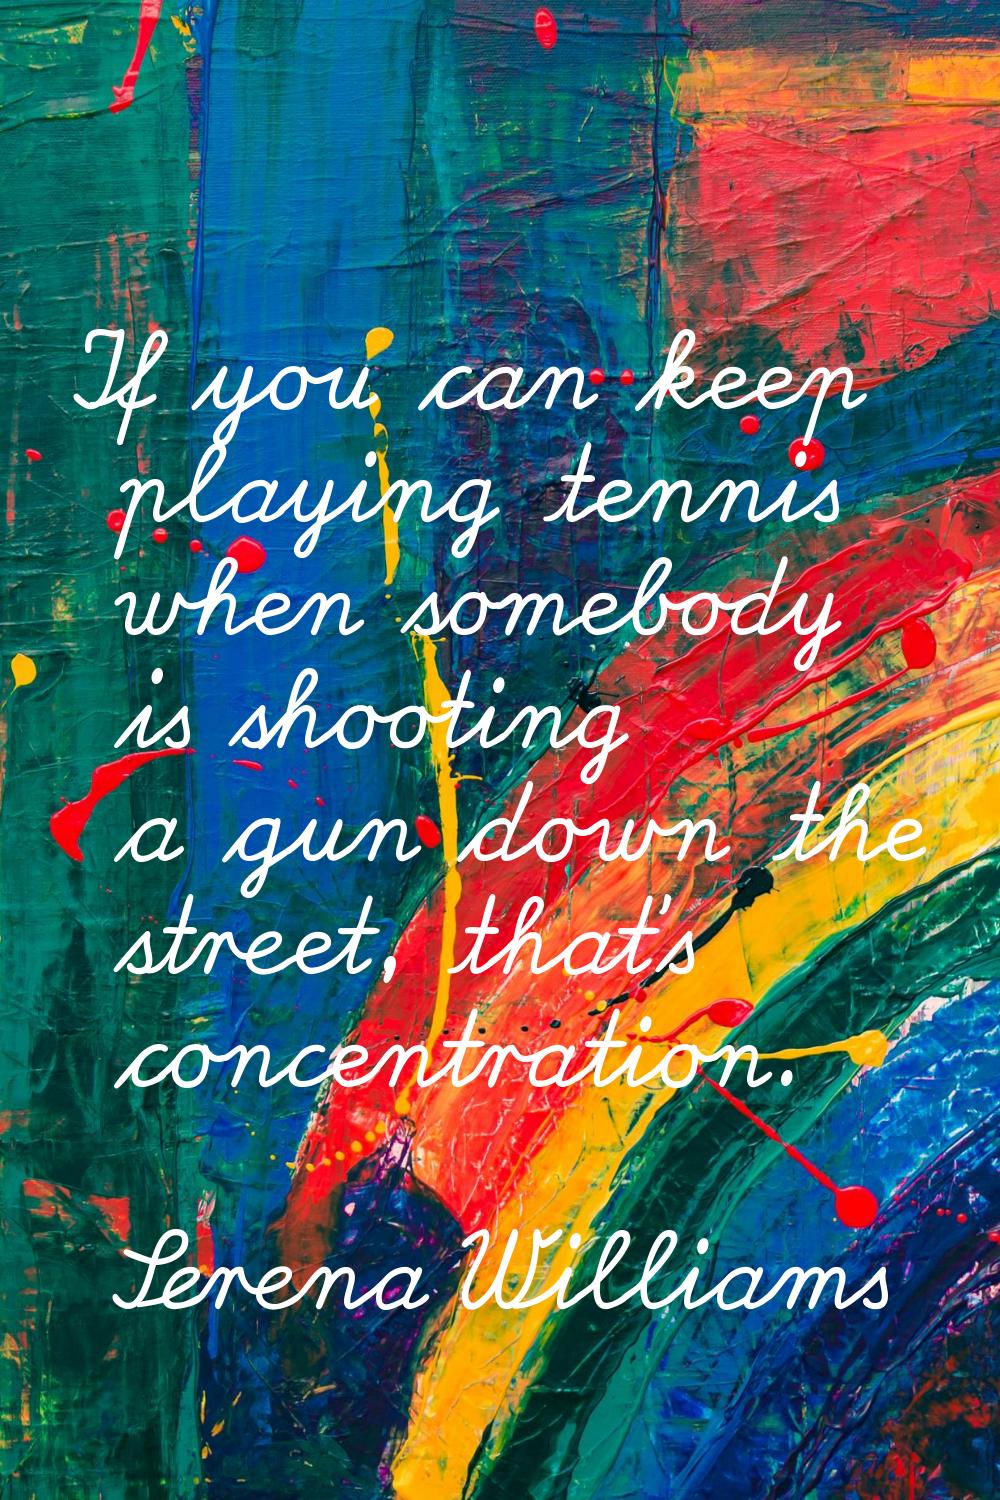 If you can keep playing tennis when somebody is shooting a gun down the street, that's concentratio